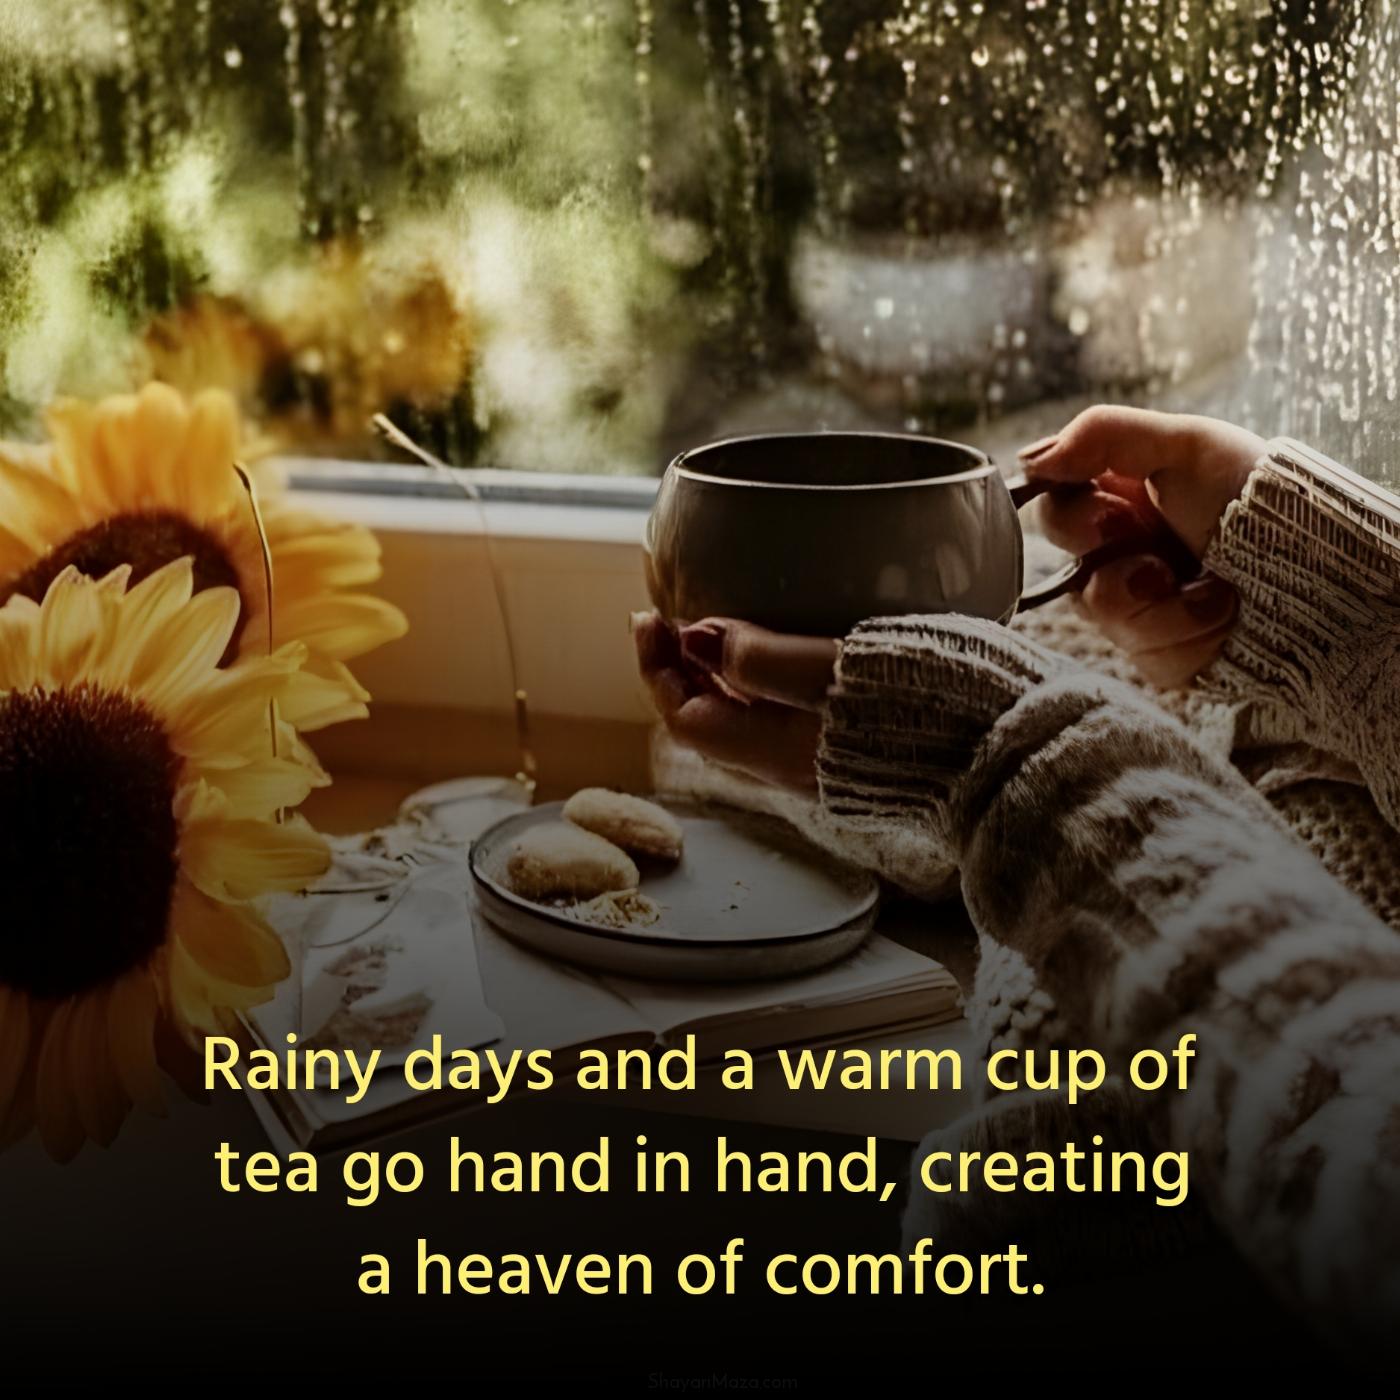 Rainy days and a warm cup of tea go hand in hand